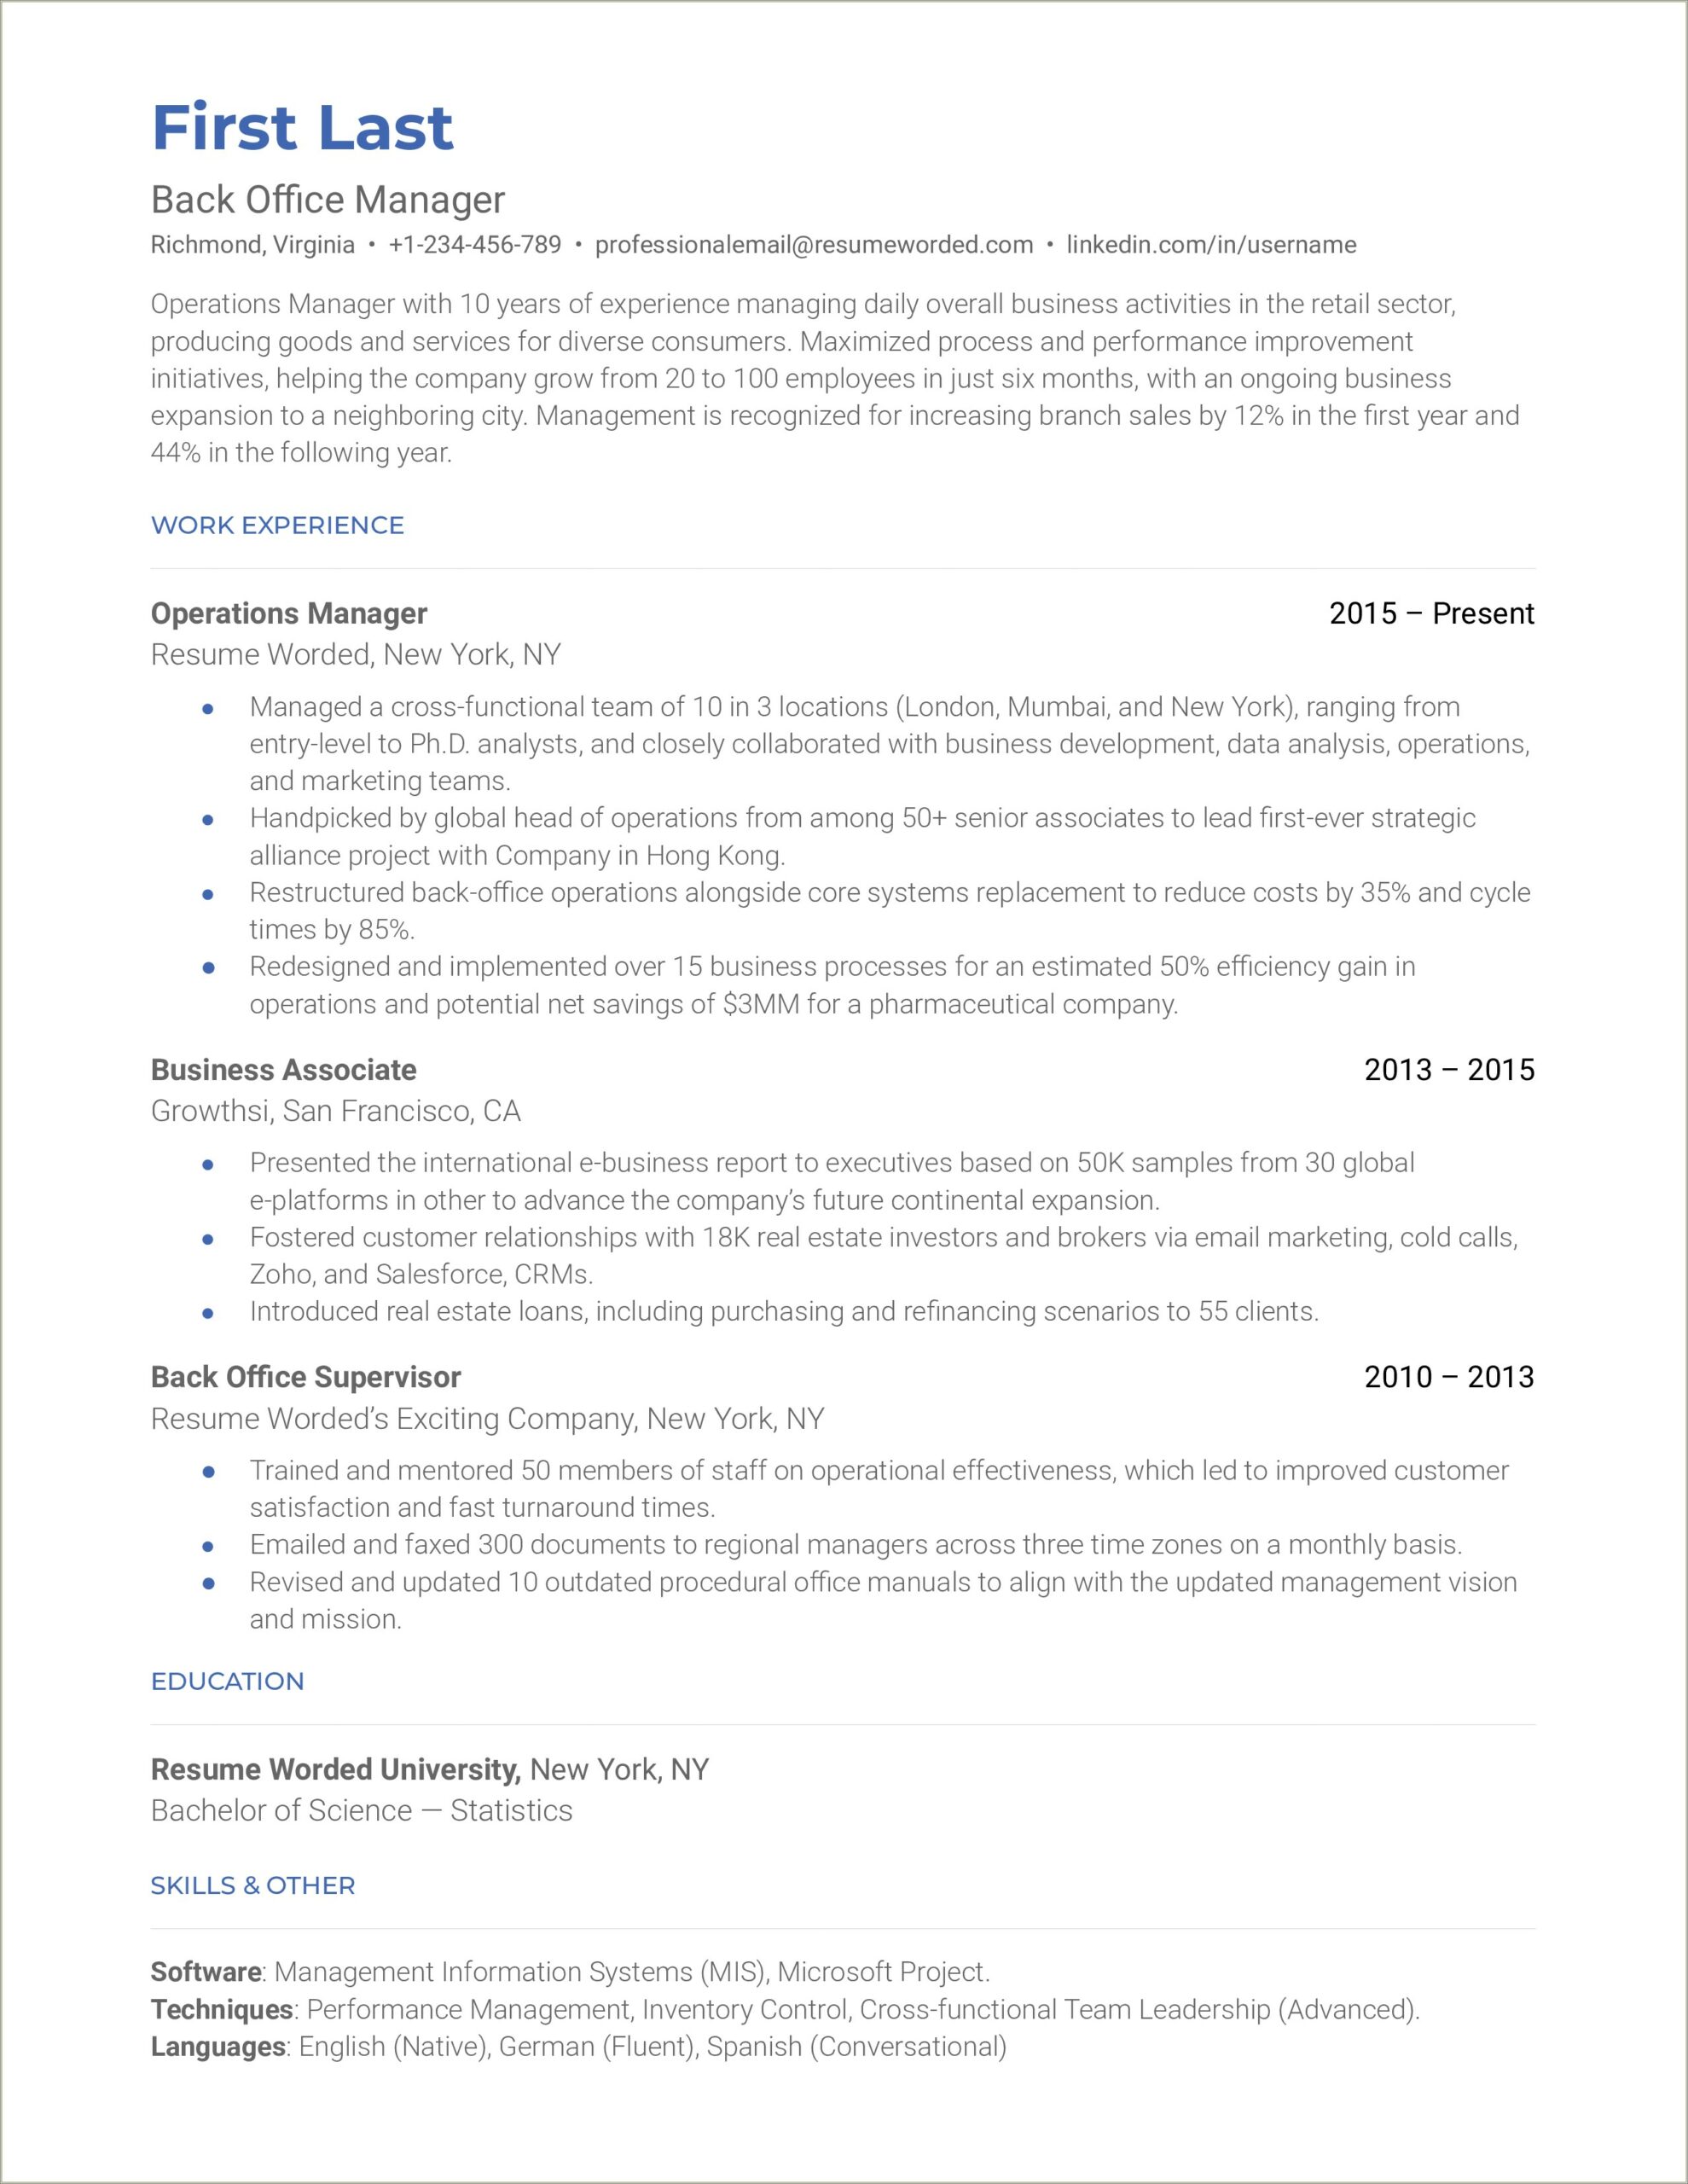 Resume Of Applicant's Activities And Experience Layout